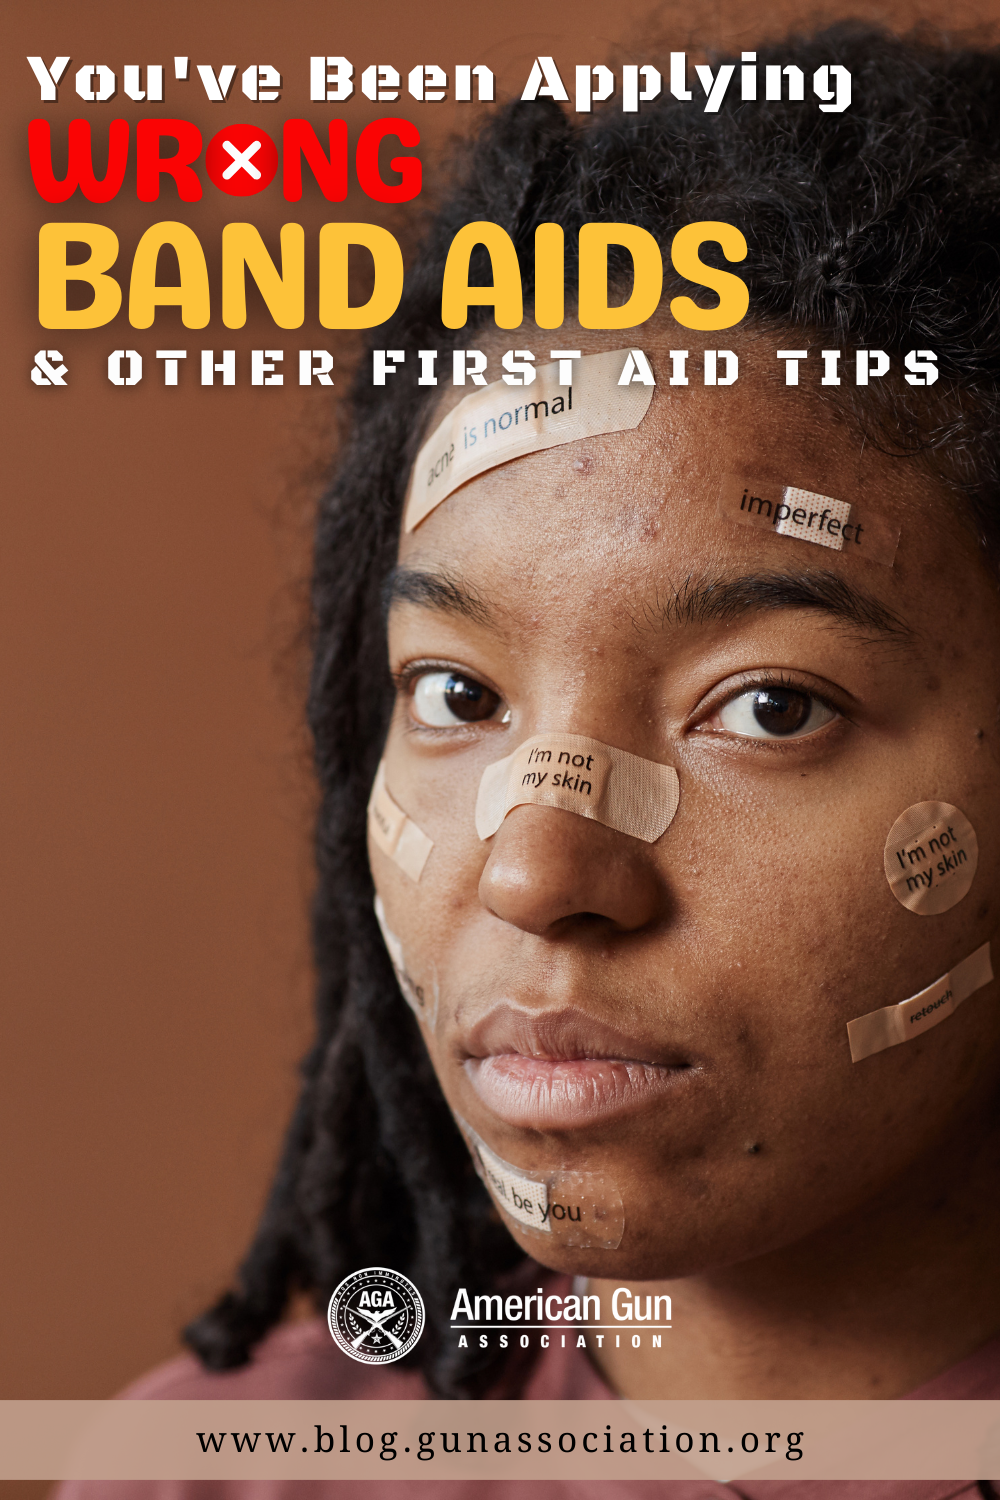 You've Been Applying Band-Aids Wrong And Other First Aid Tips You Should Never Ignore